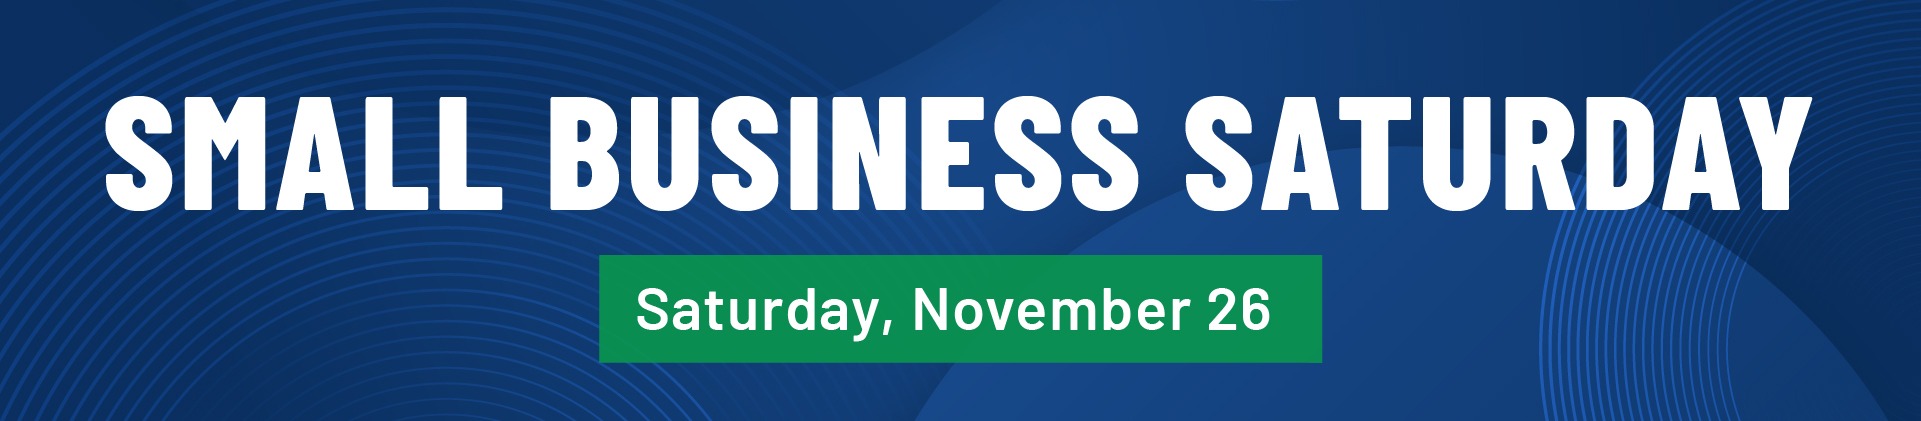 Make your final preparations for Small Business Saturday!